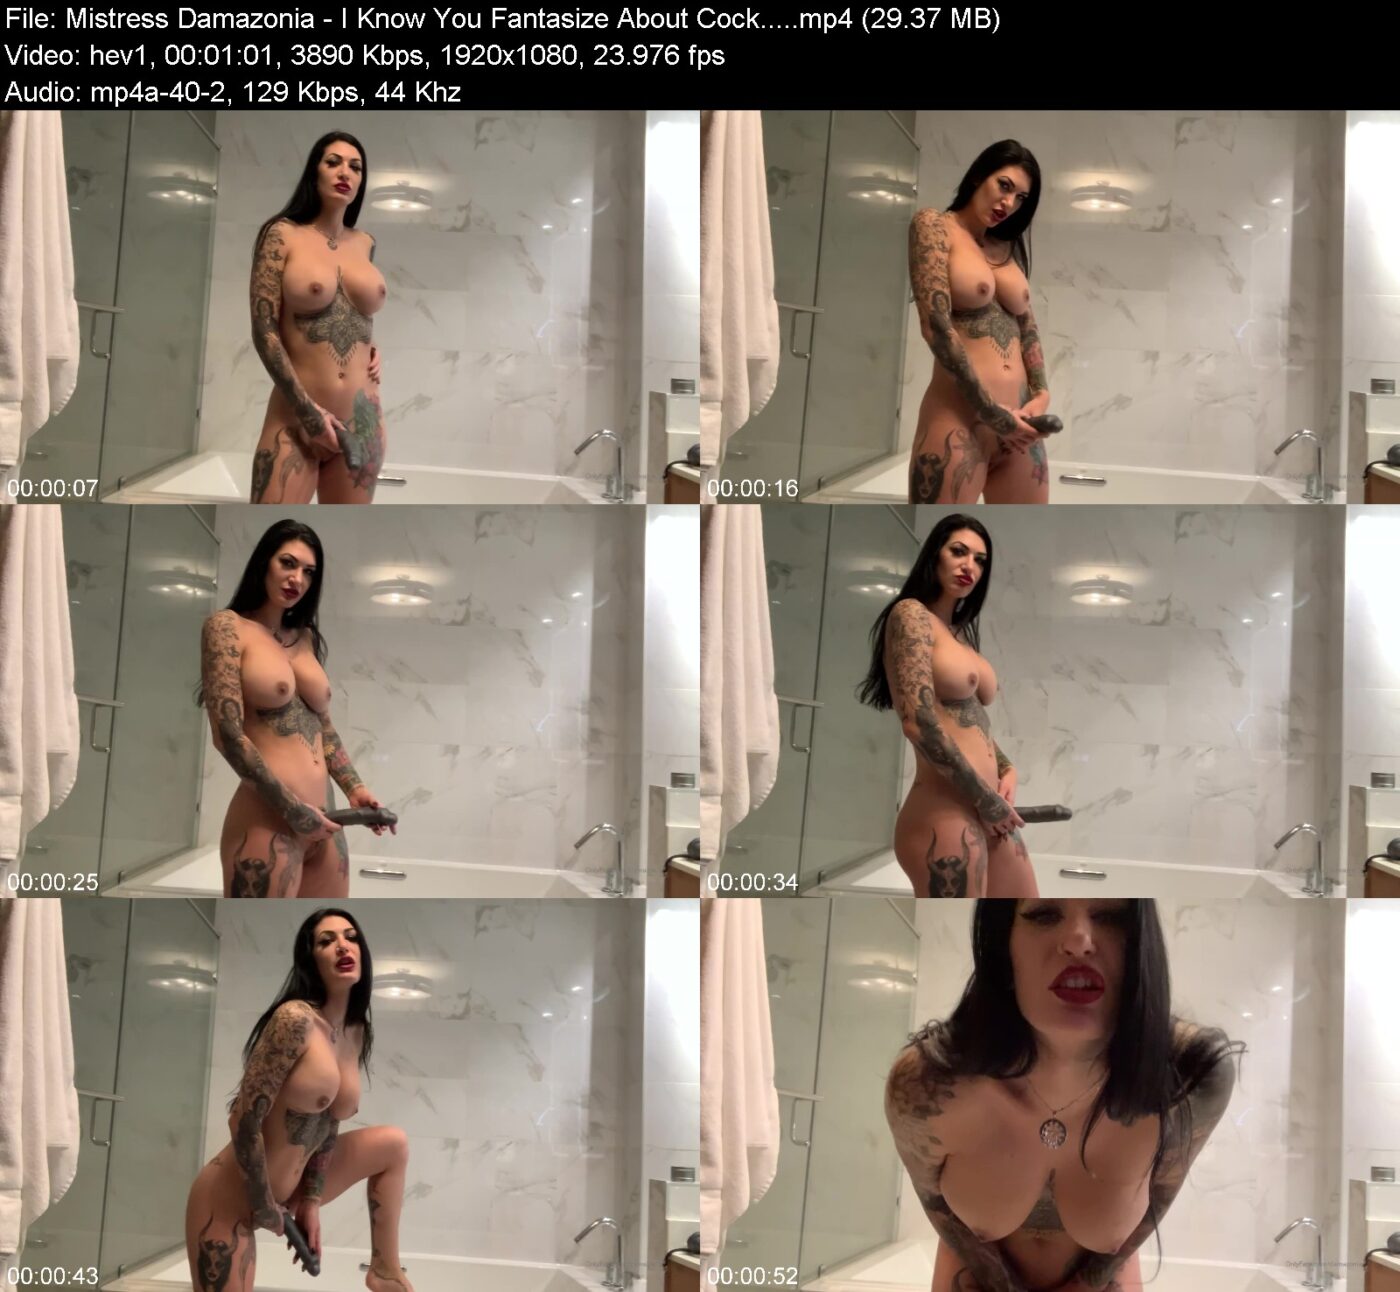 Actress: Mistress Damazonia. Title and Studio: I Know You Fantasize About Cock….